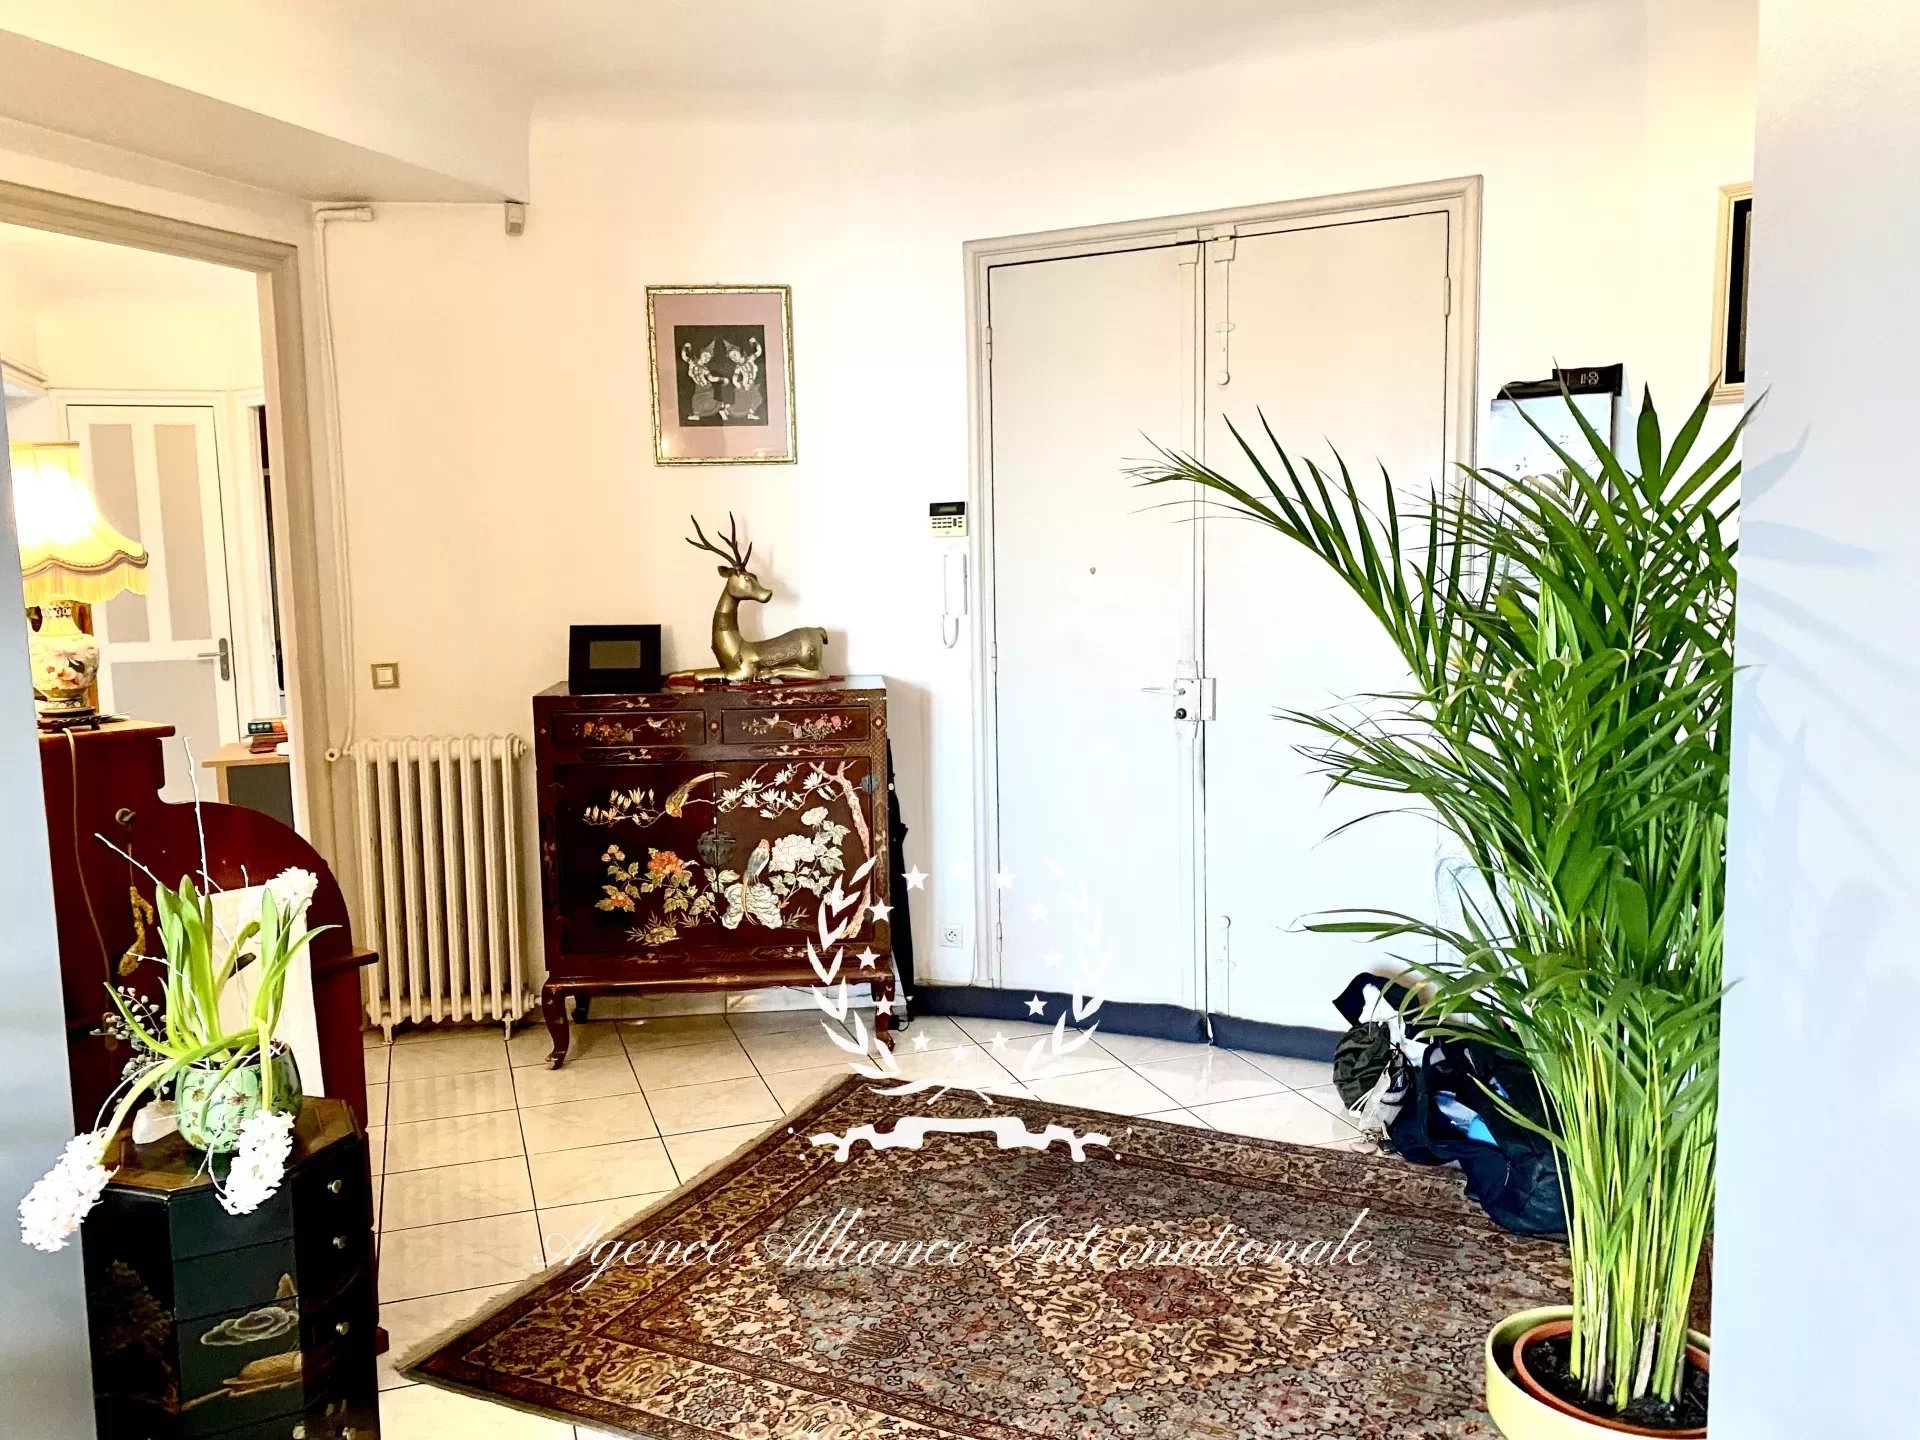 BOURGEOIS - 2 BEDROOM APARTEMENT - 2 STEPS FROM THE BEACH